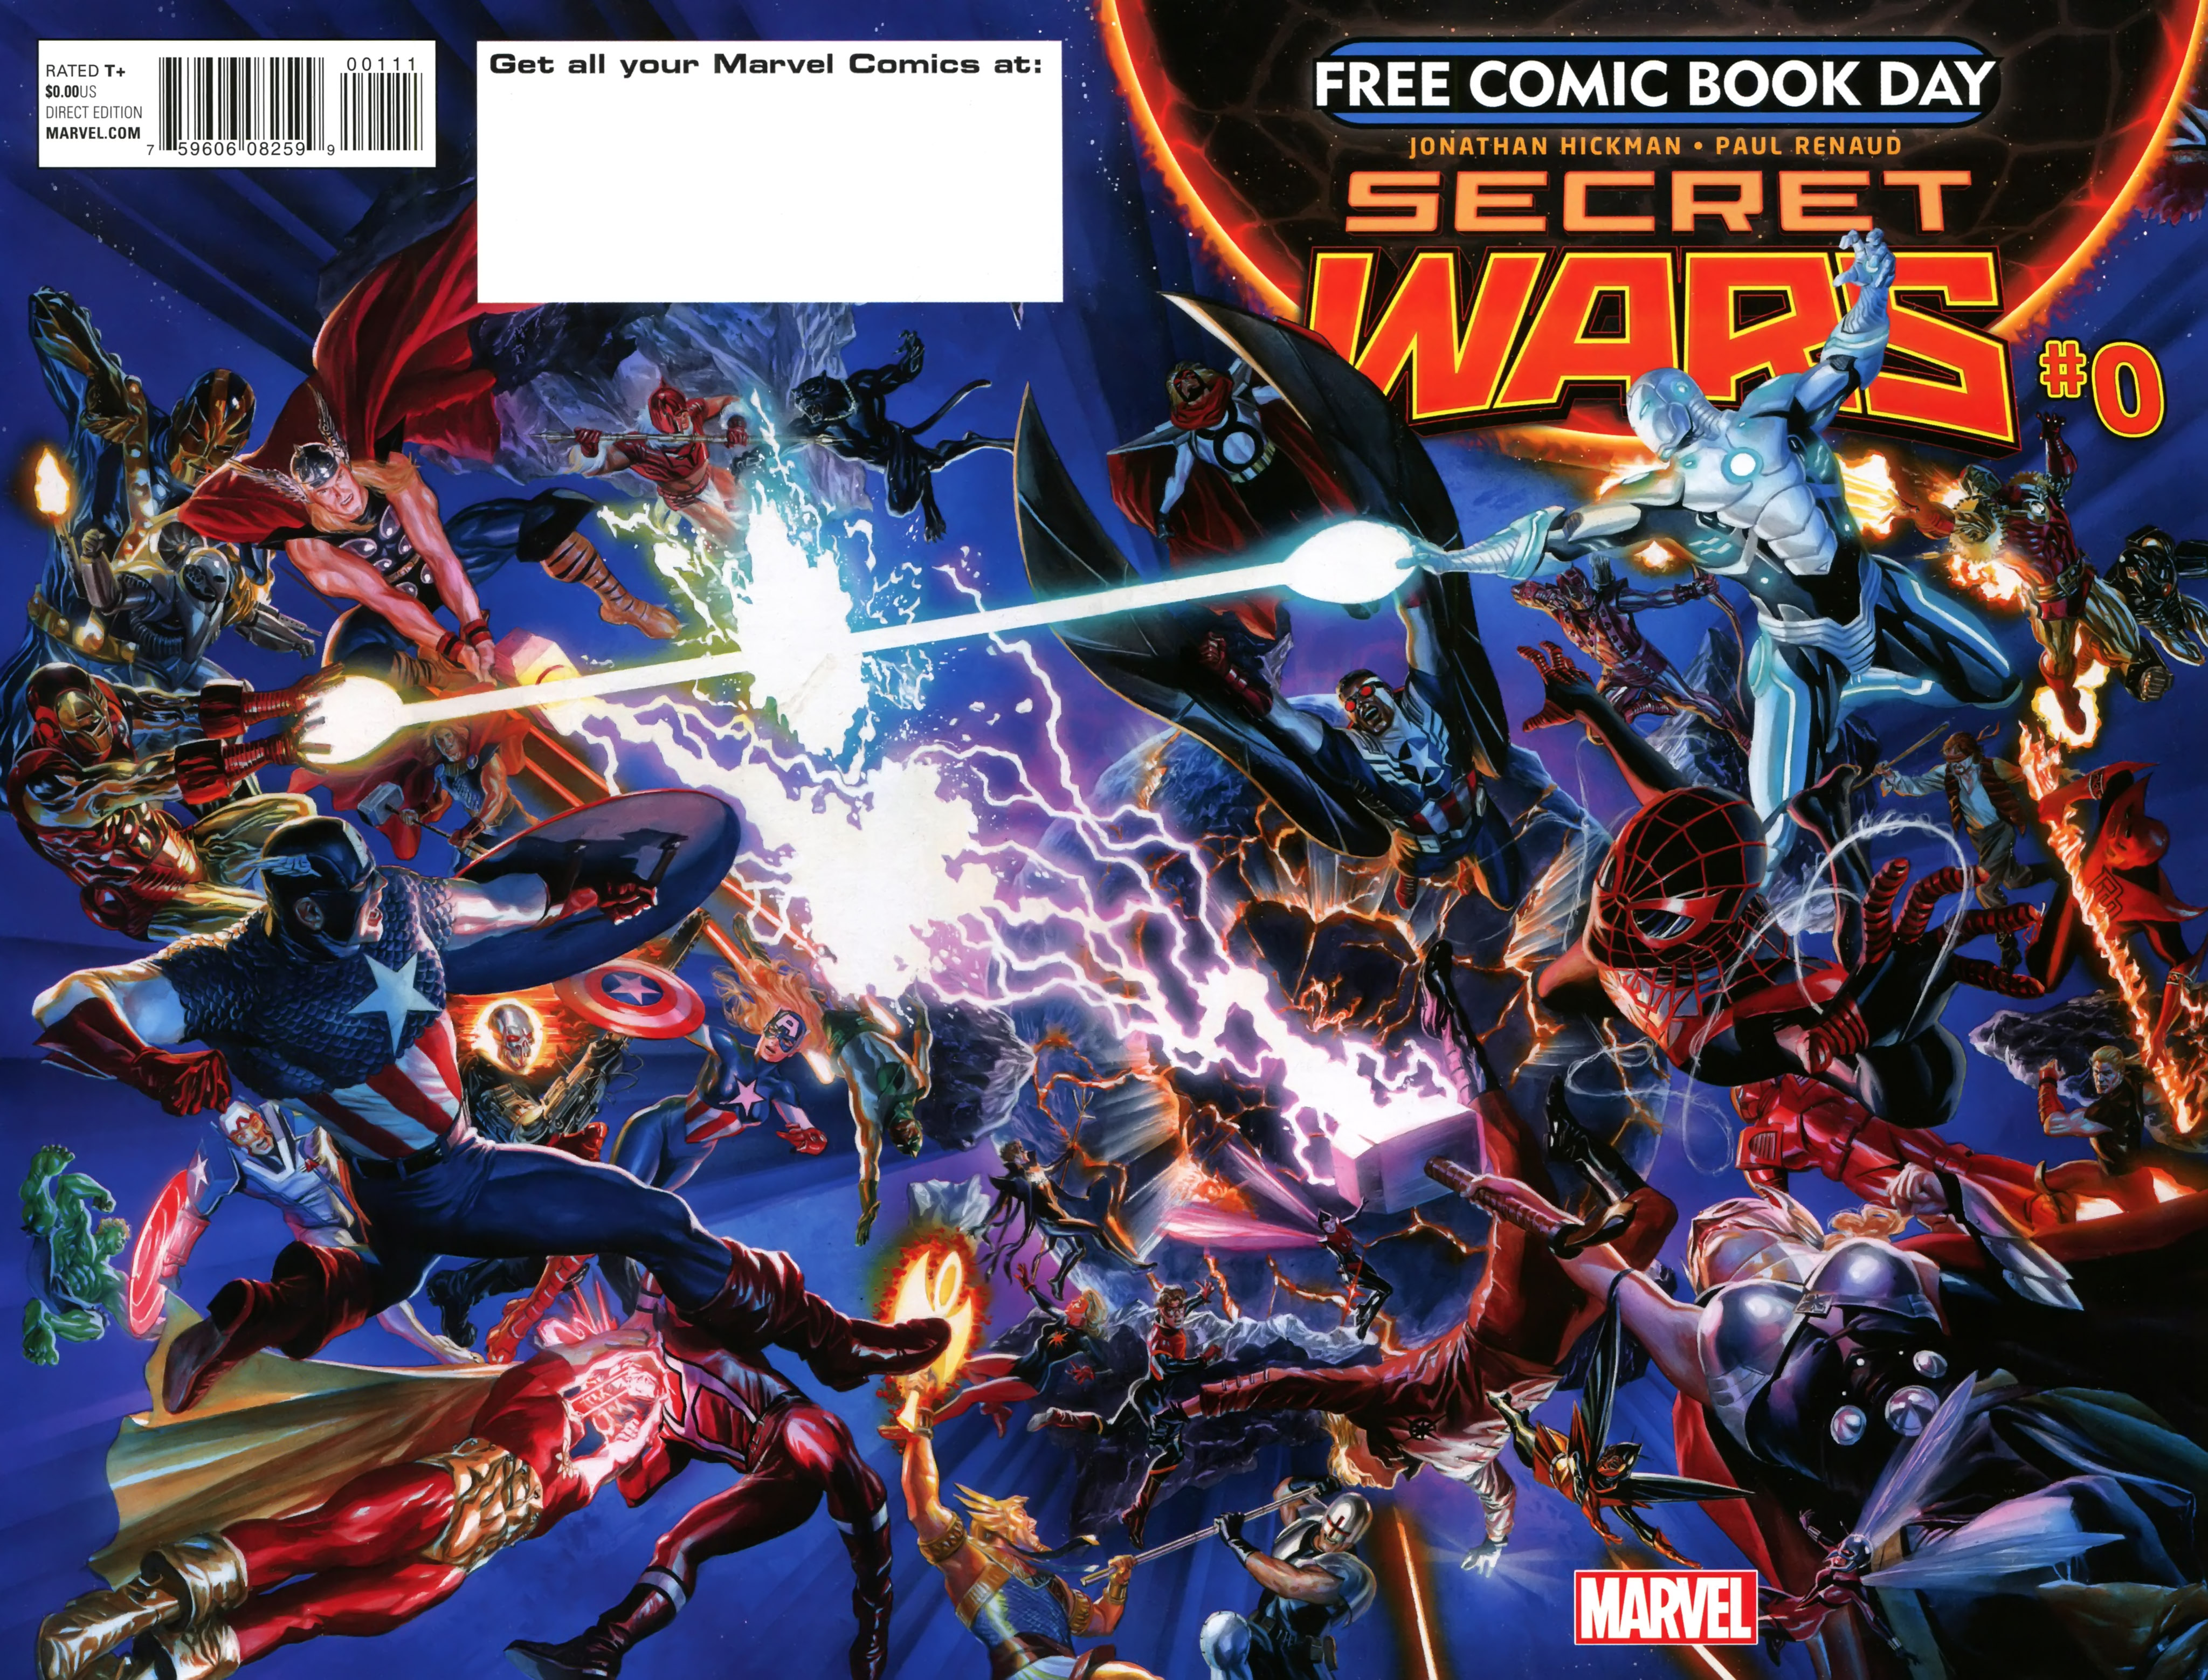 Read online Free Comic Book Day 2015 comic - Issue Secret Wars.